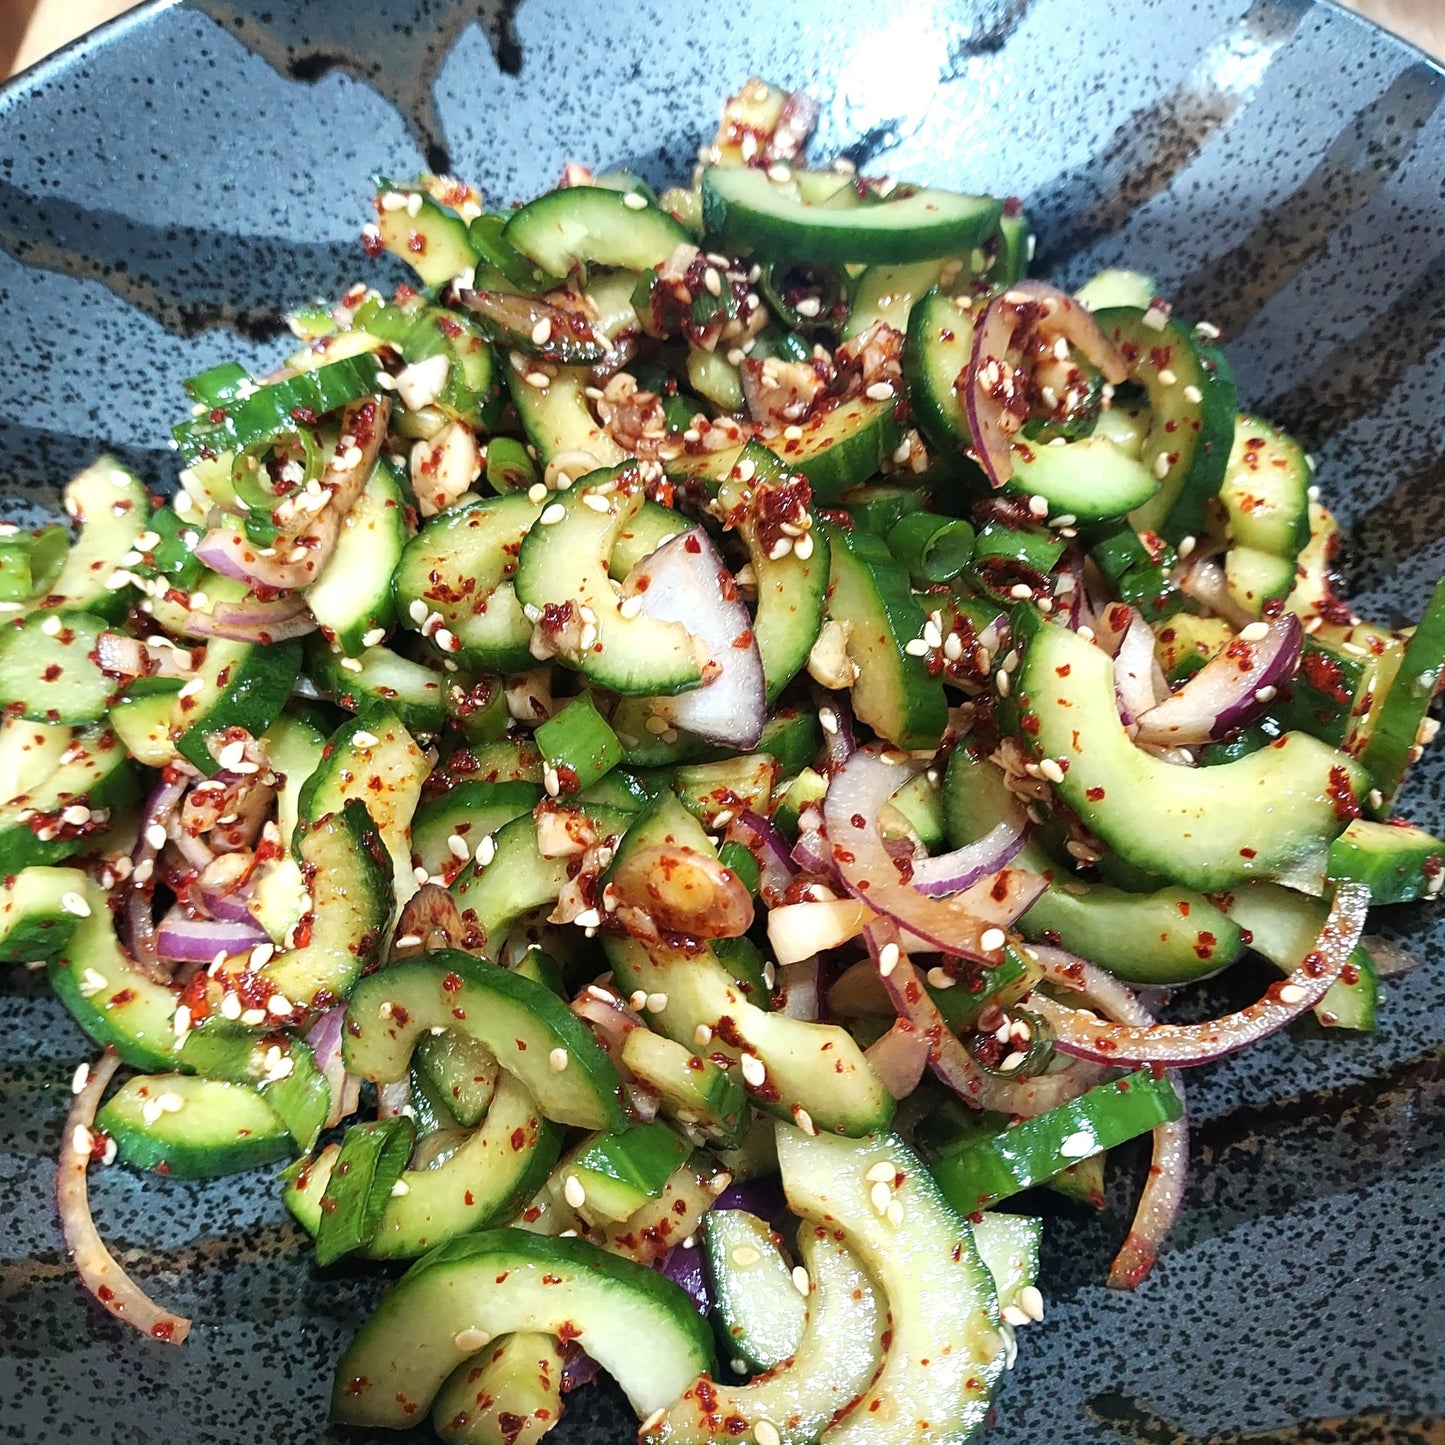 Sliced and seeded lebanese cucumber mixed with a little sesame chilli condiment to make a spicy and fresh salad.